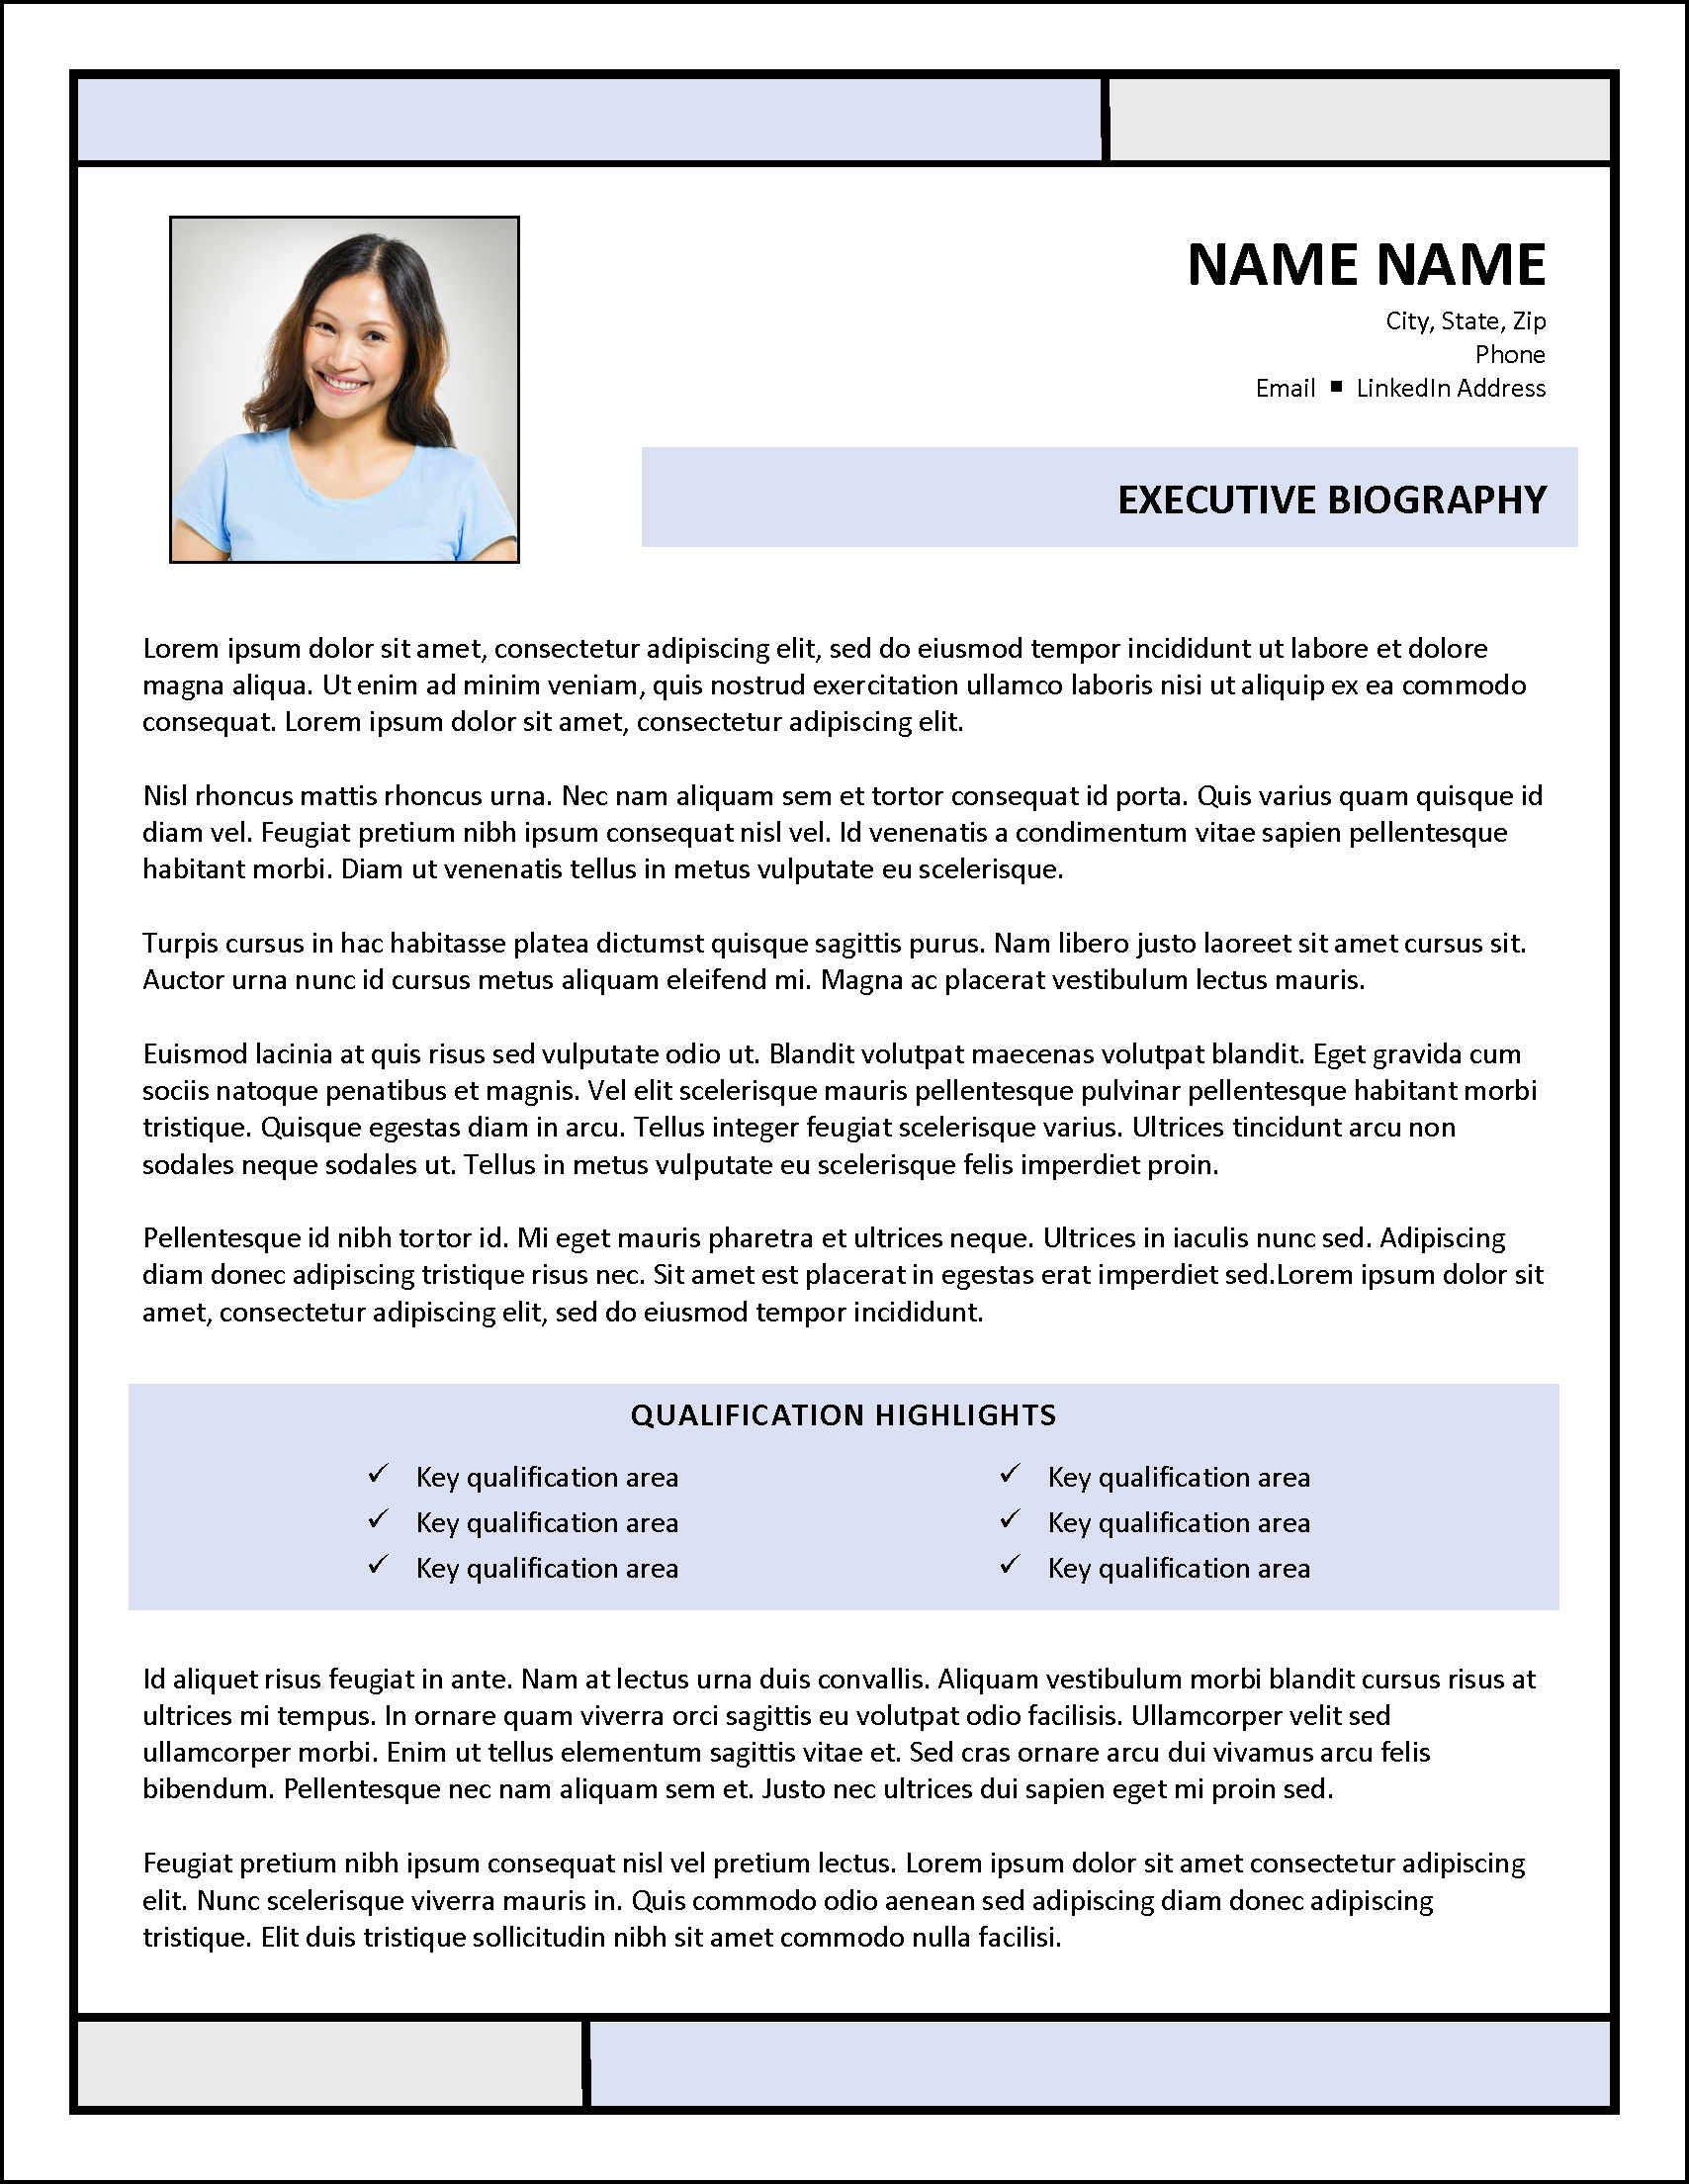 Modern biography template designed to match our ATS friendly resume template